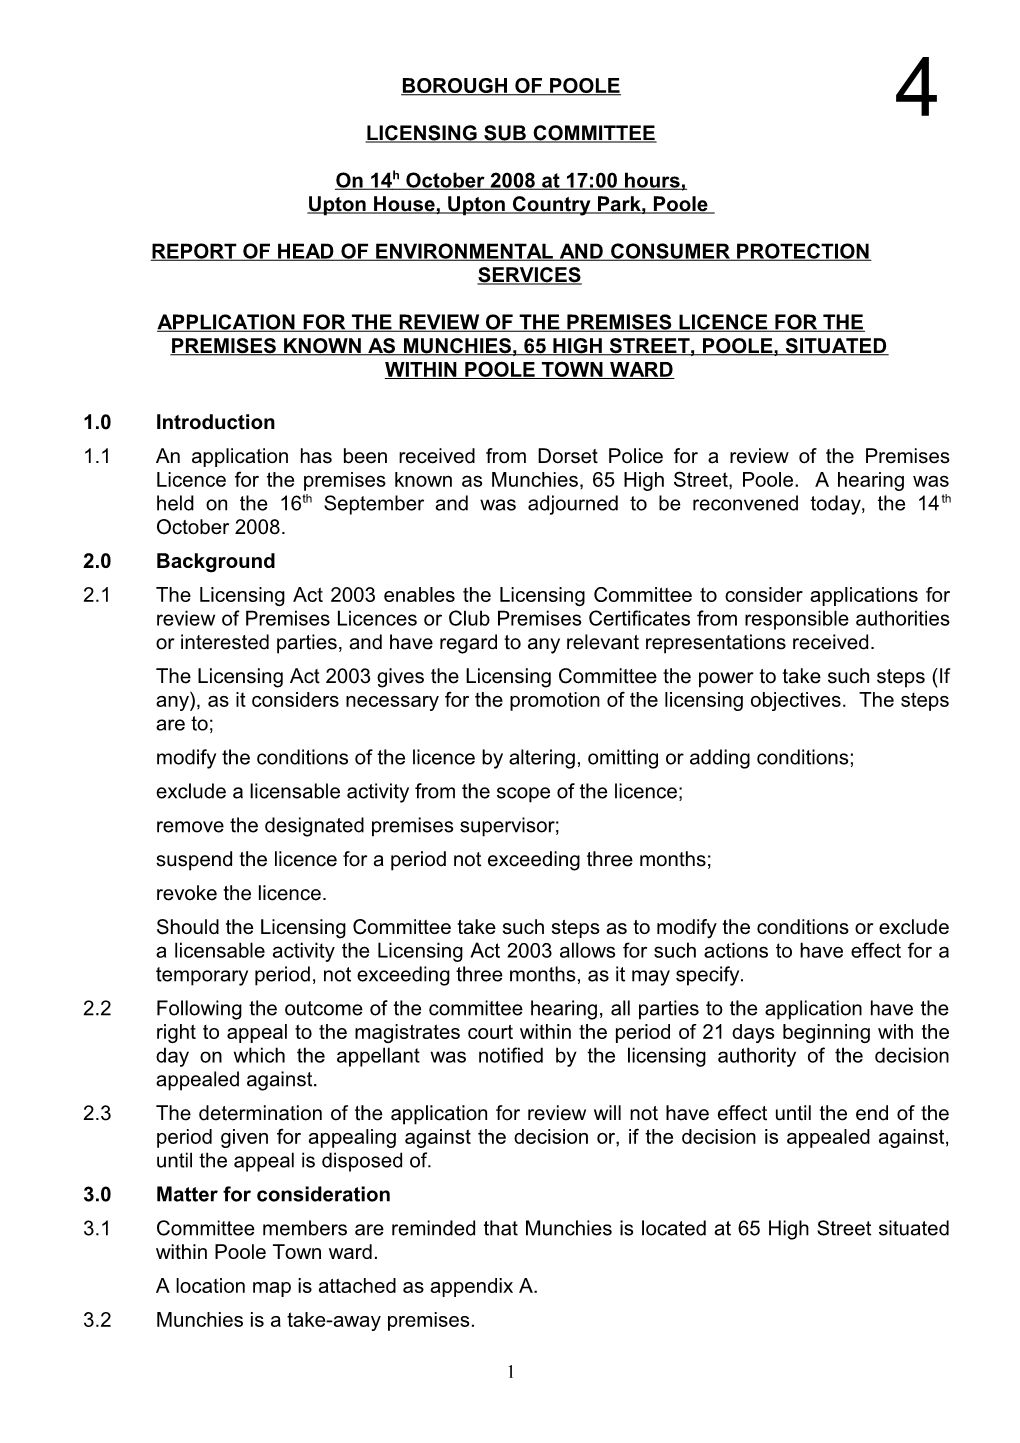 Application for the Review of the Premises Licence for the Premises Known As Munchies